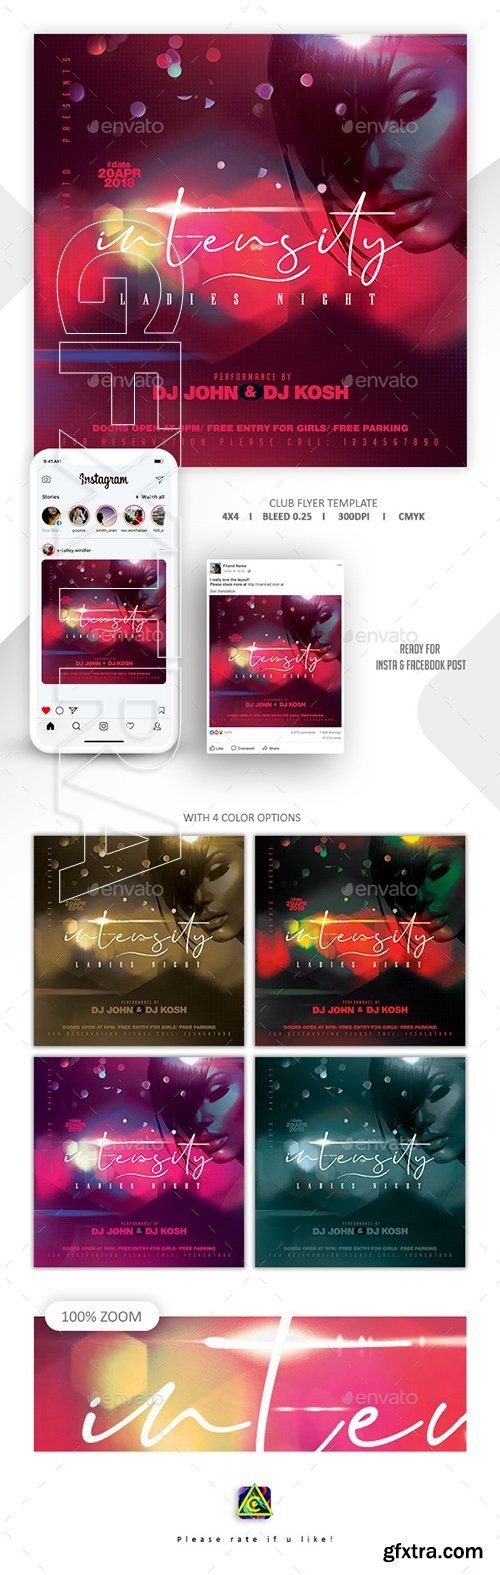 GraphicRiver - Night Club Flyer Template 22754458